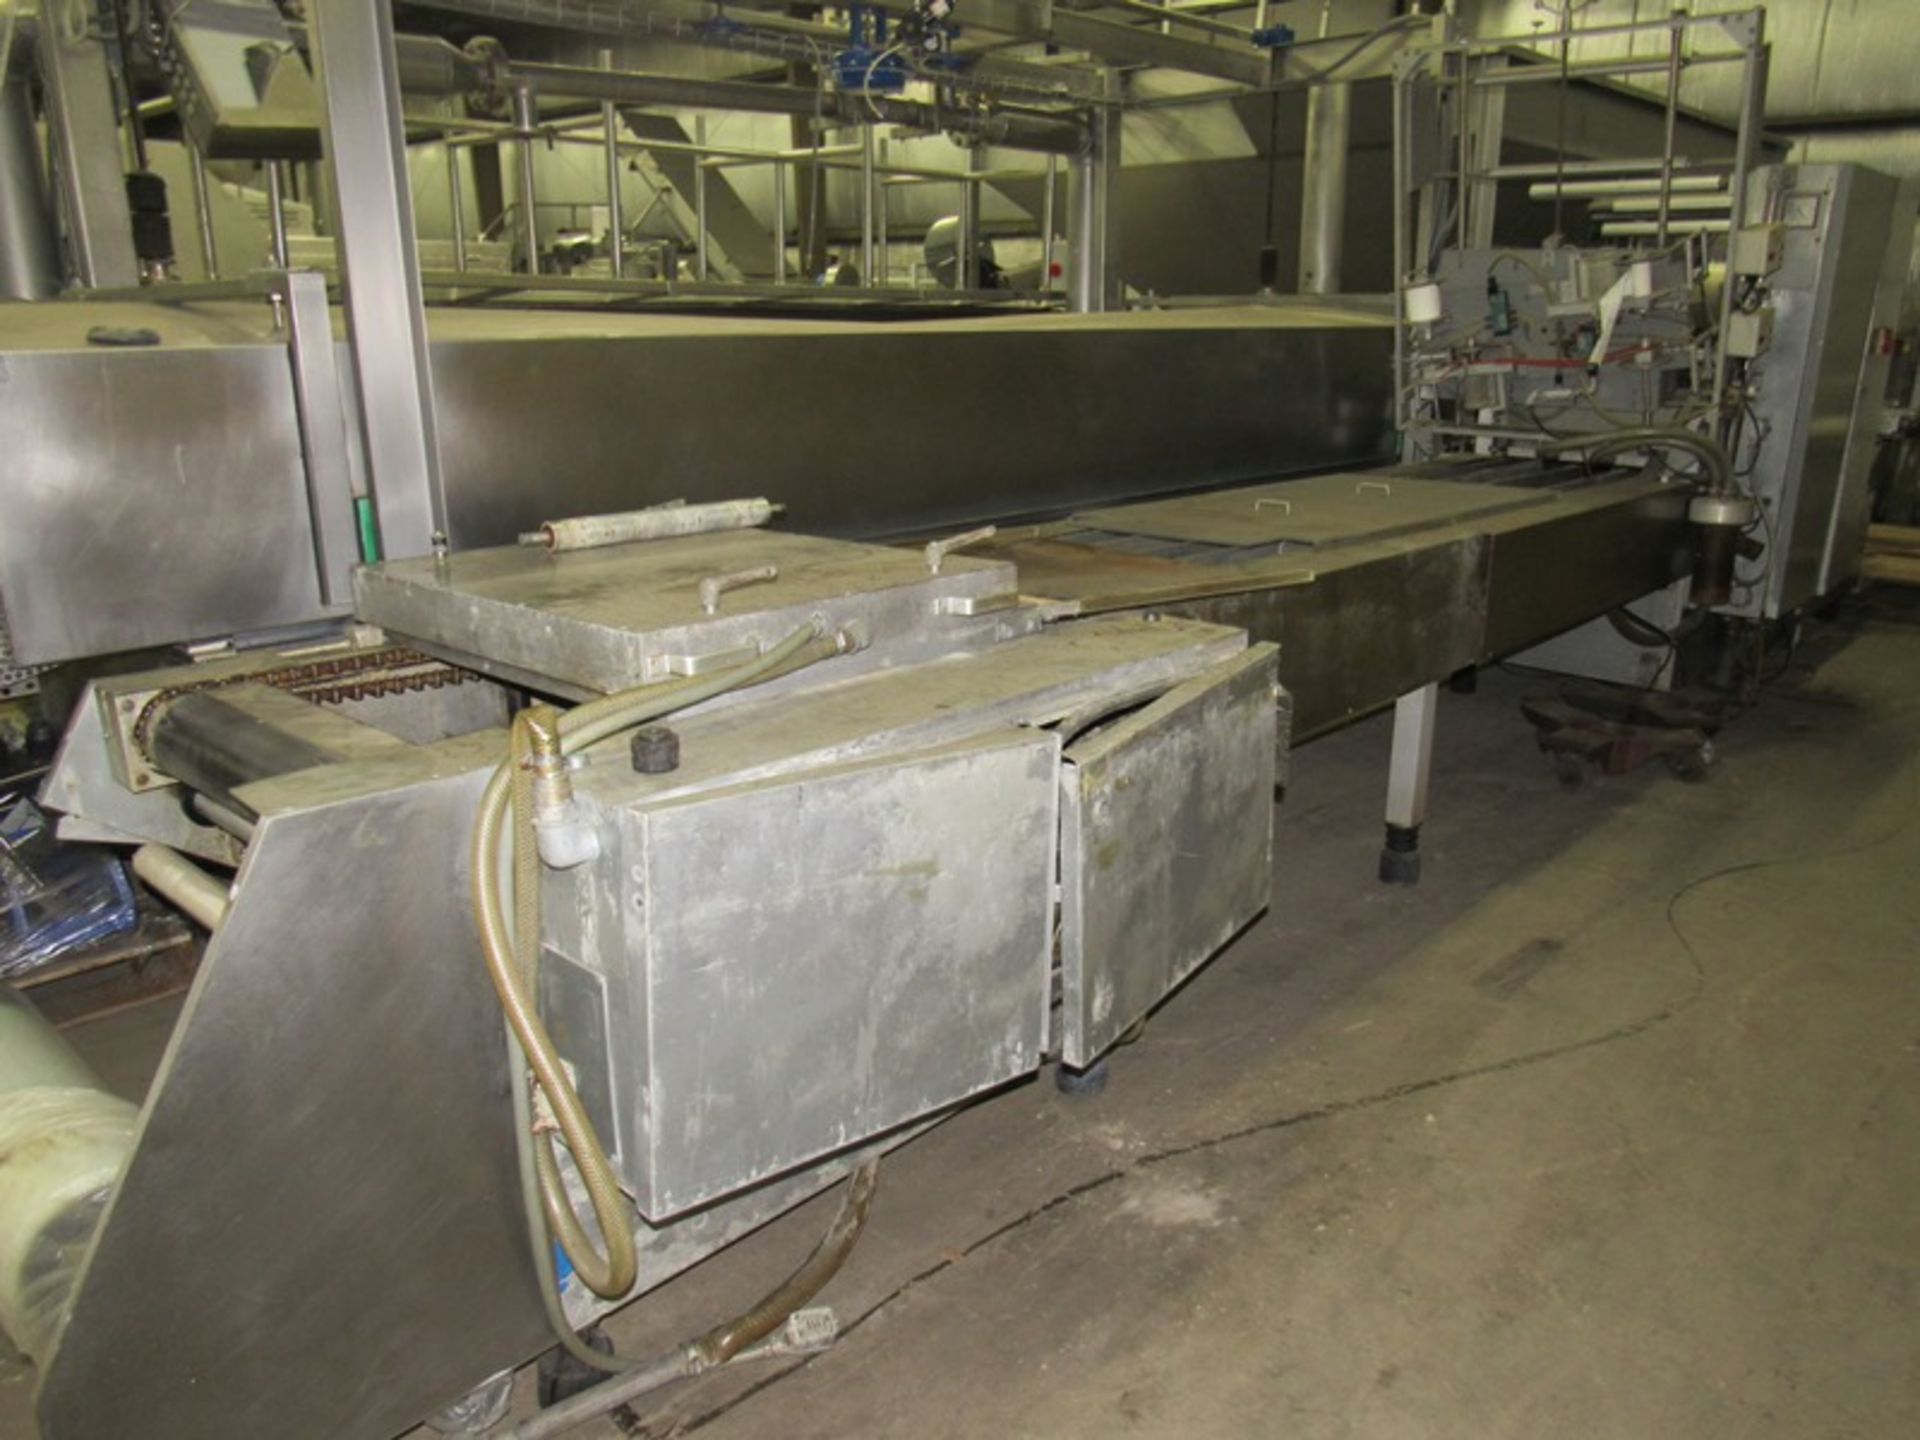 Kramer Grebe Rollstock Packager, 560 mm between chains, 16 up die, approx.: 120 mm wide X 150 mm - Image 17 of 19